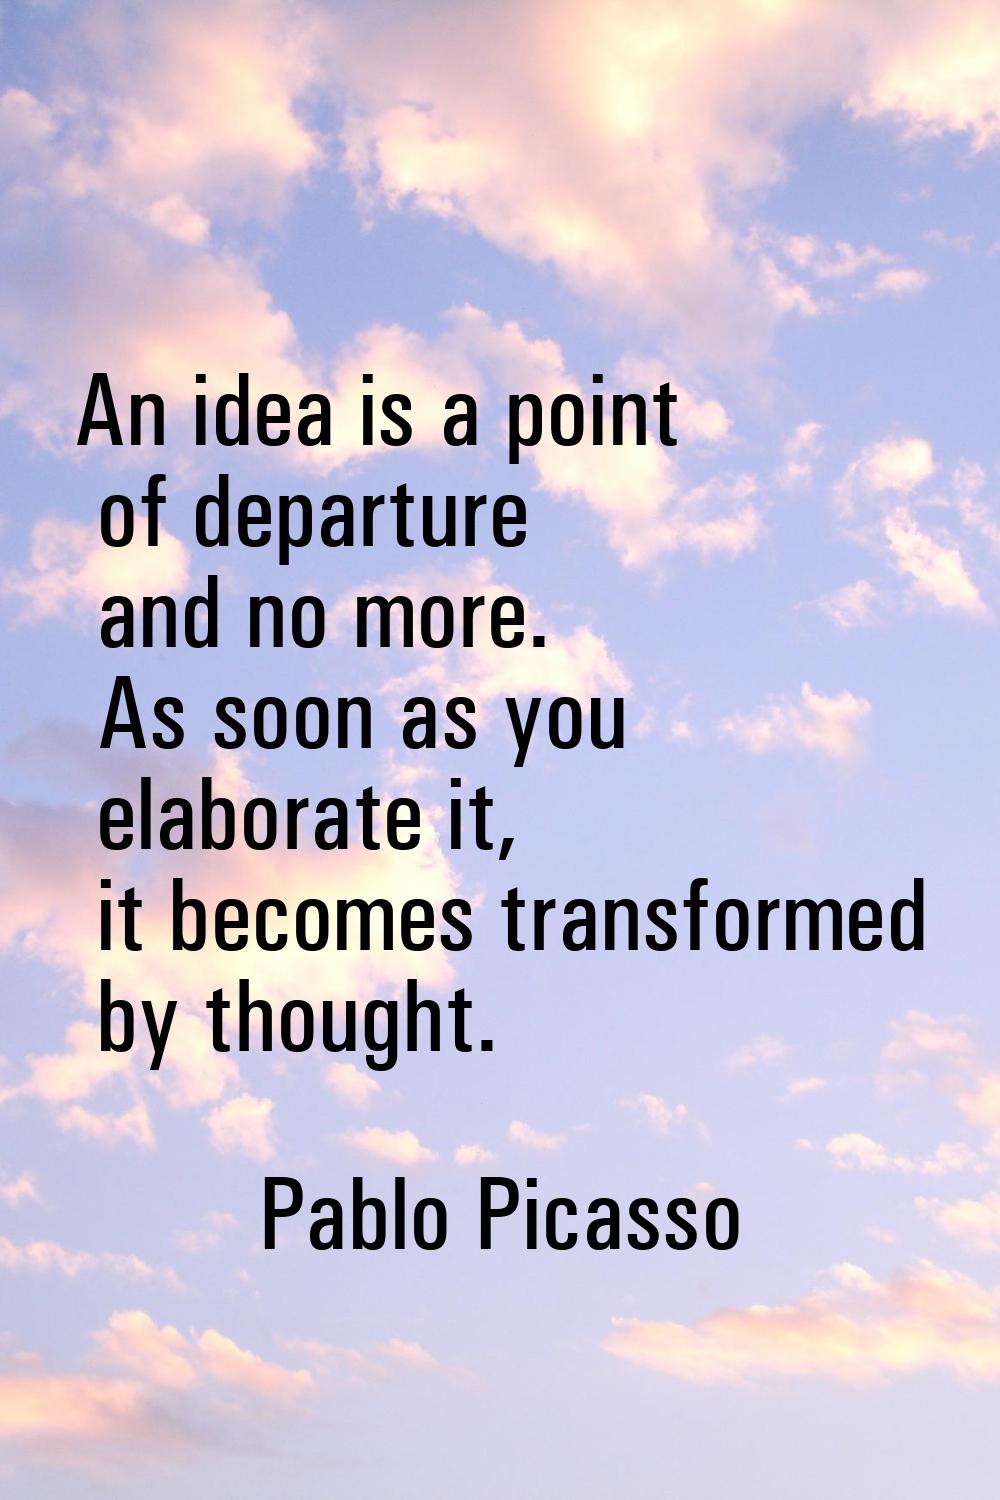 An idea is a point of departure and no more. As soon as you elaborate it, it becomes transformed by